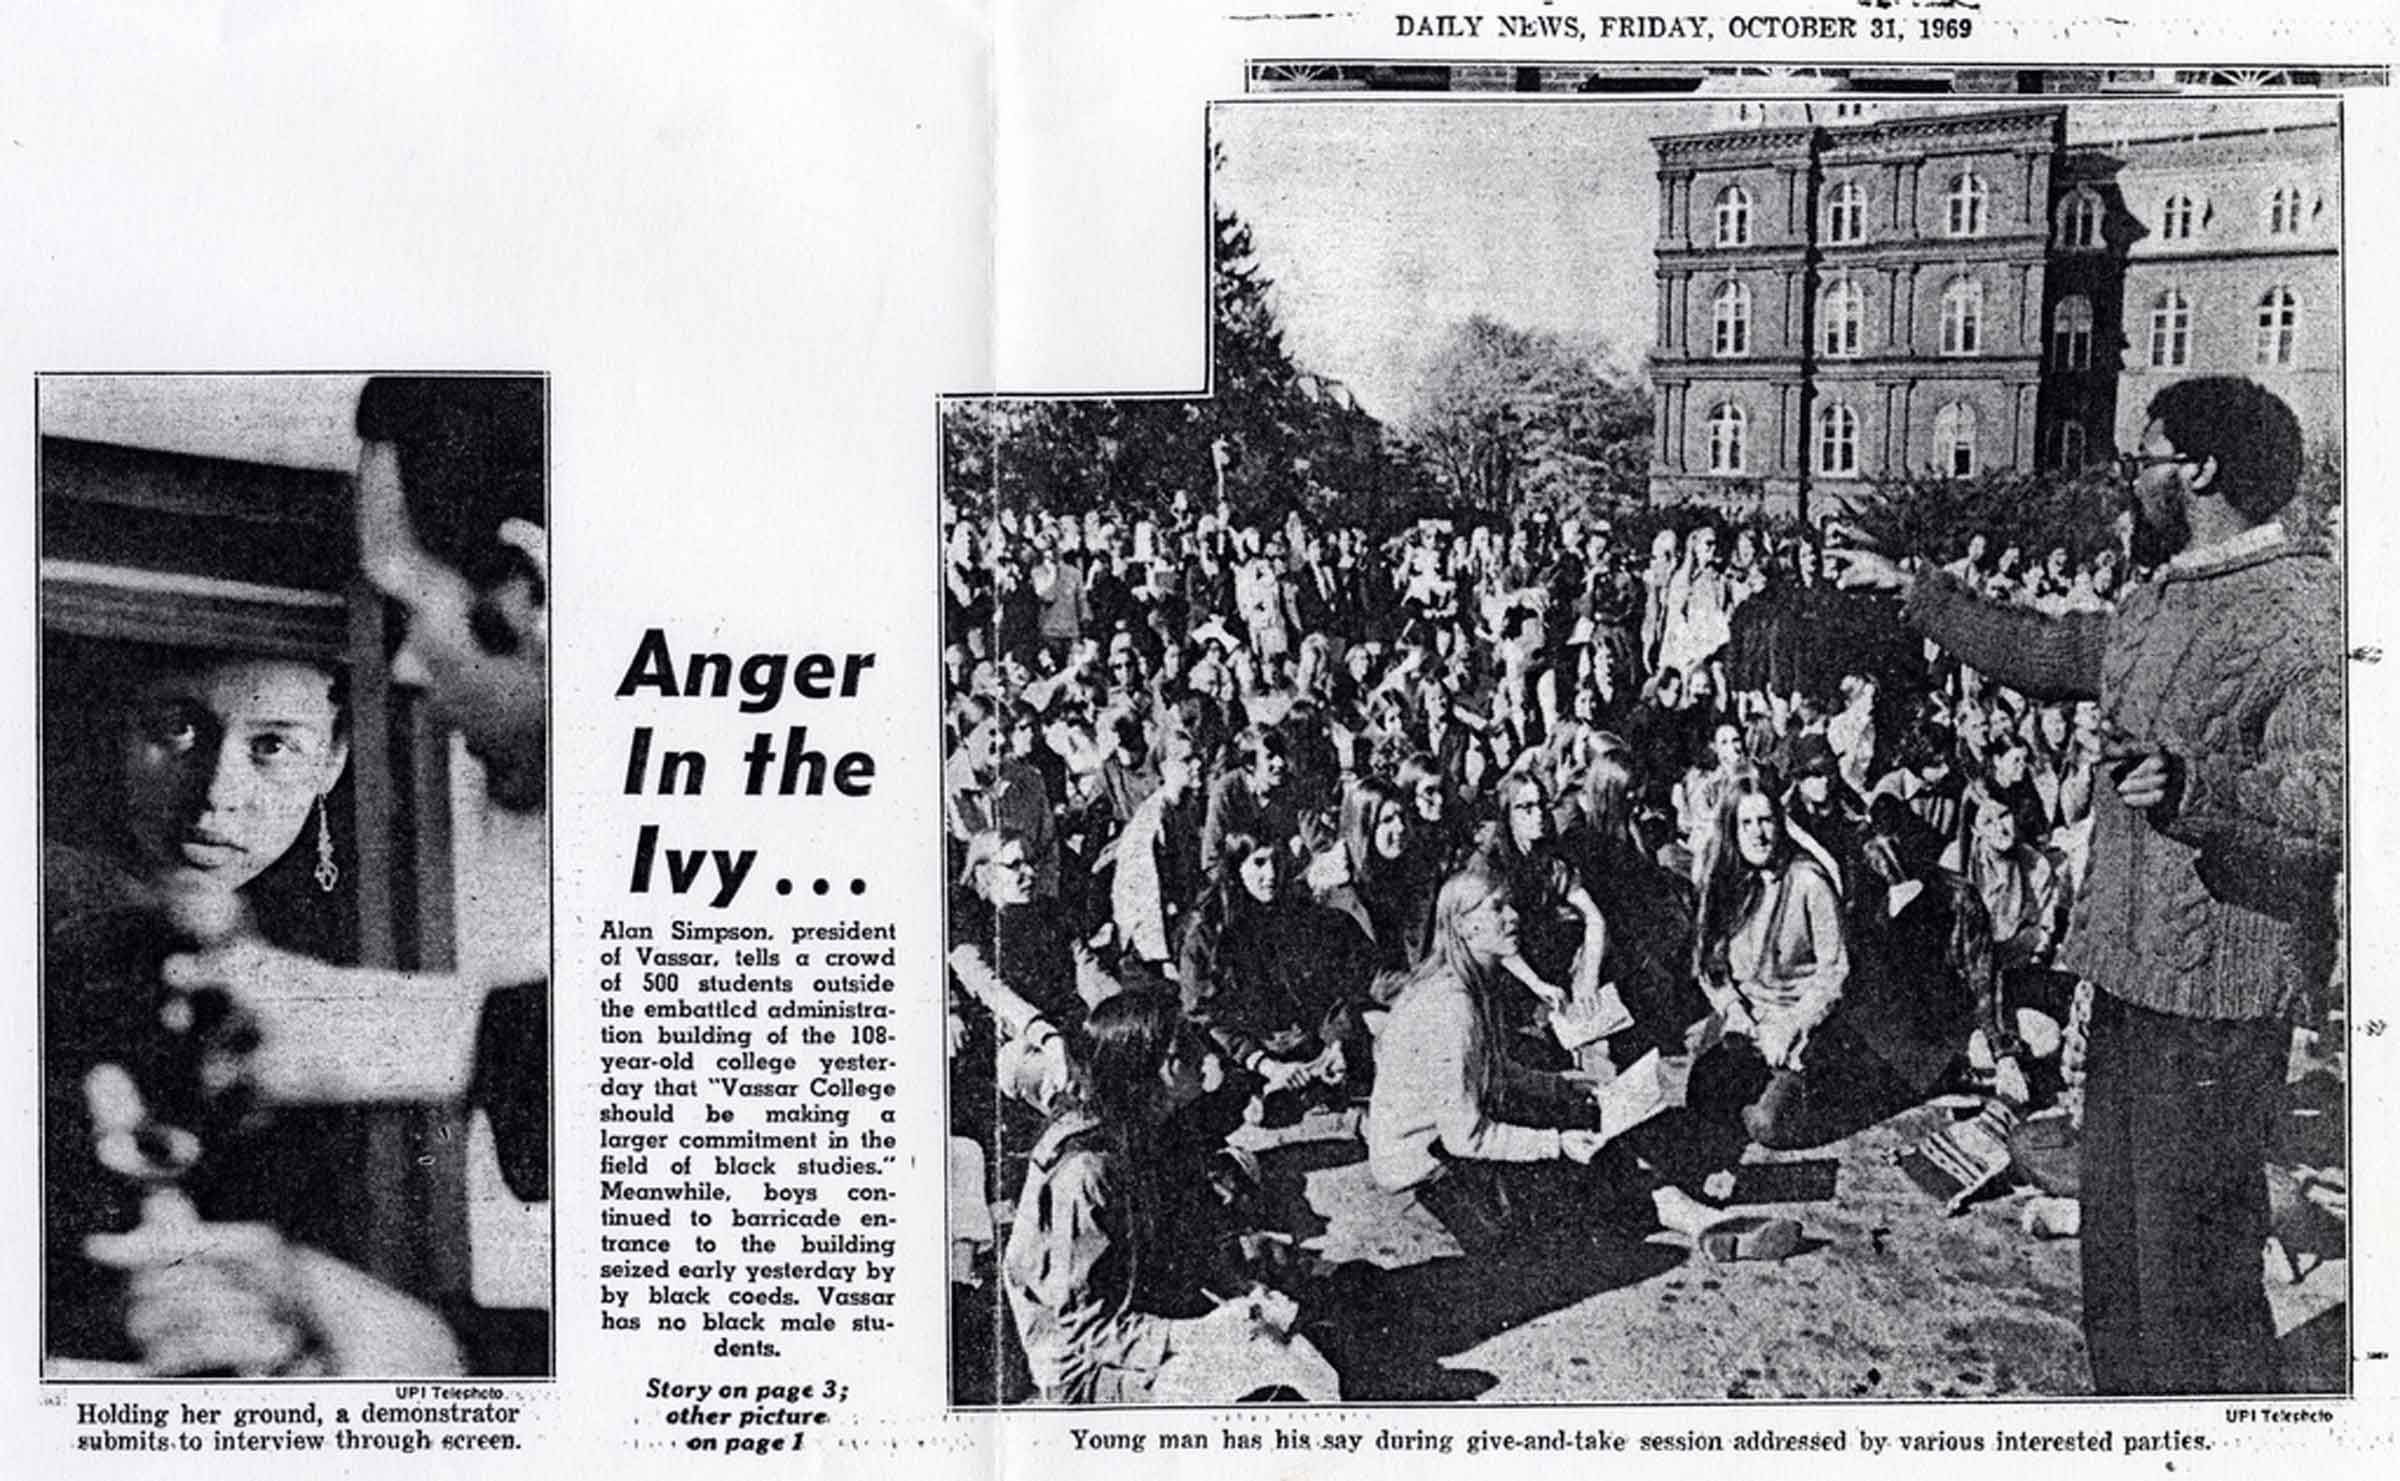 Main 1969 sit in.